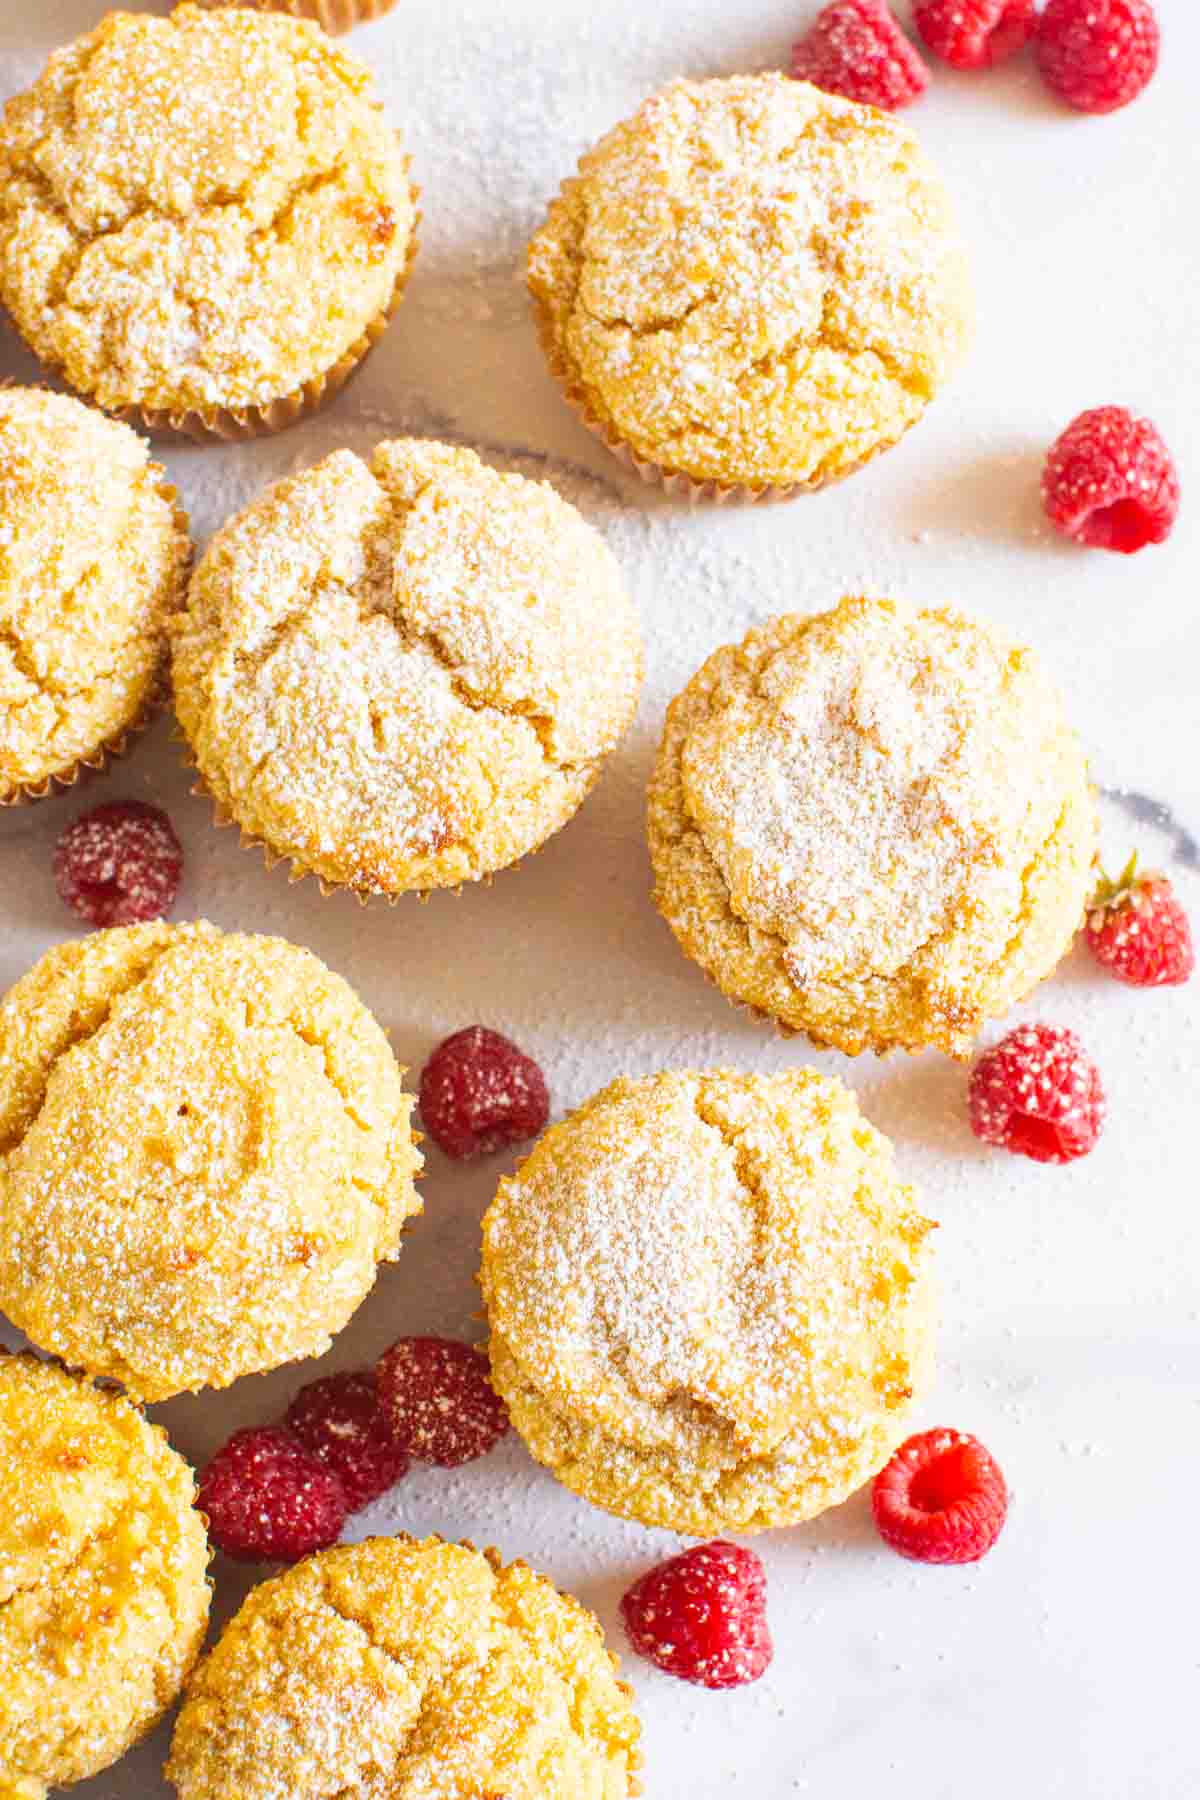 Looking down at muffins dusted with sugar and raspberries around them.